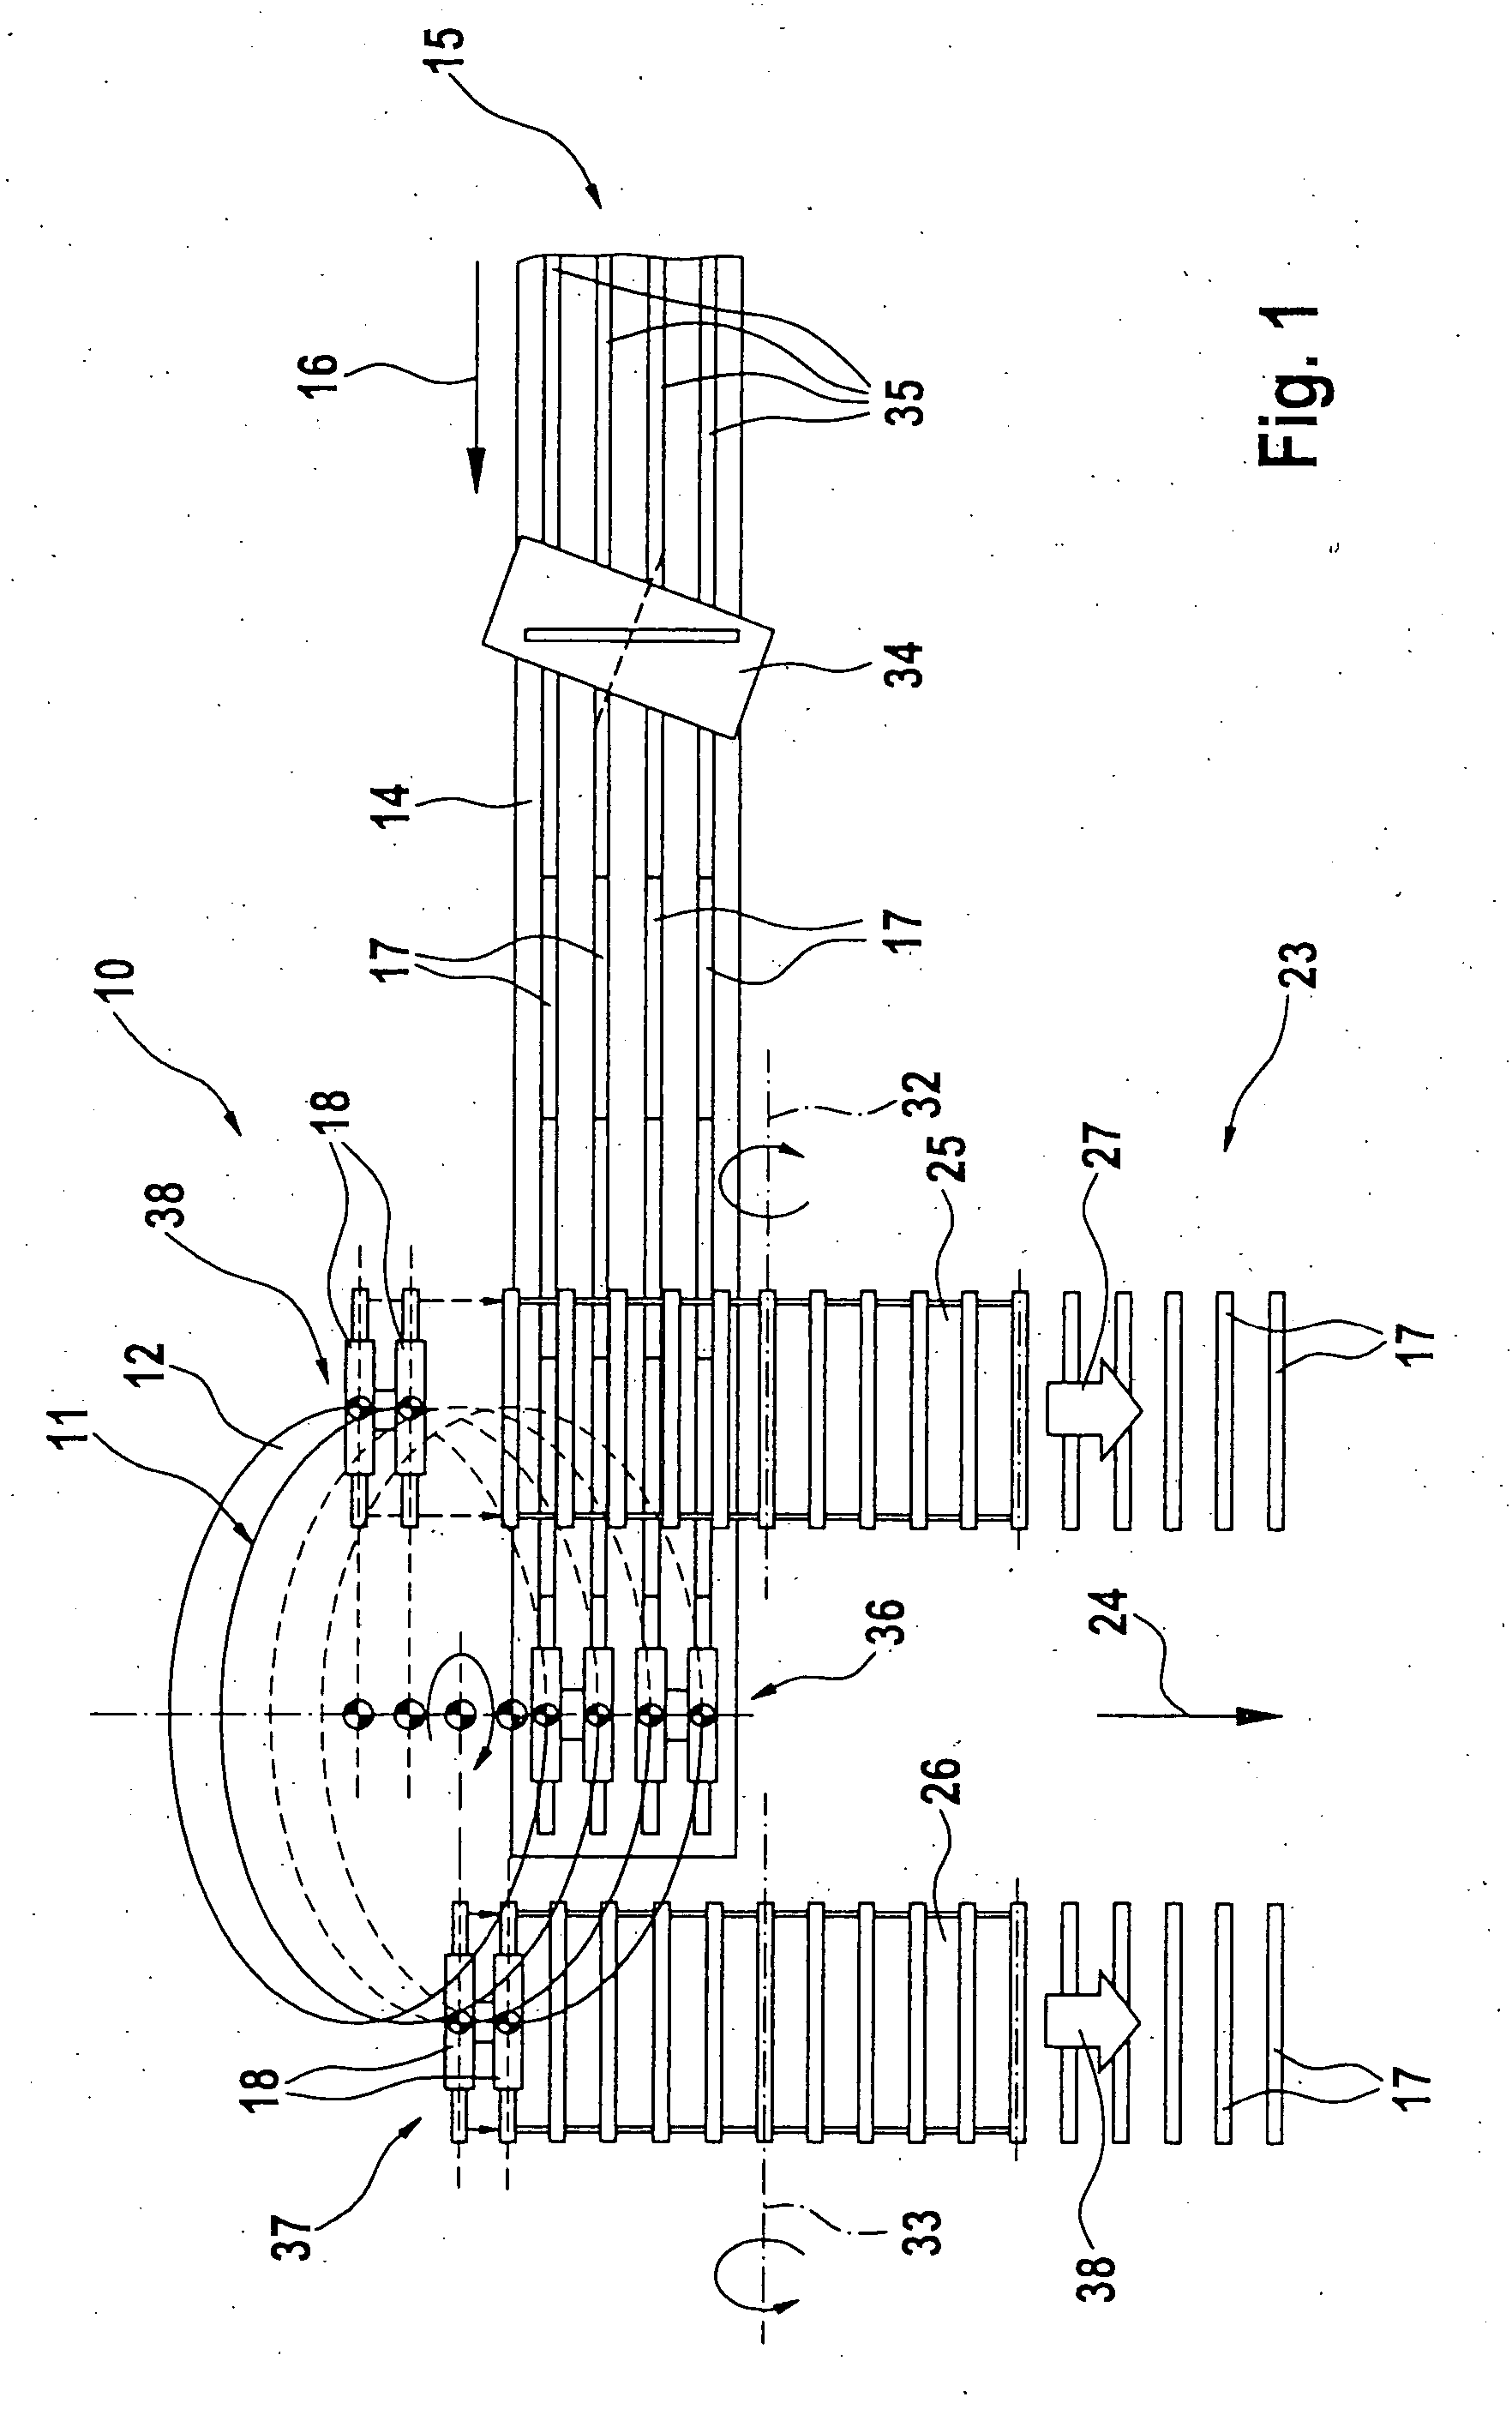 Apparatus and method for the transfer of rod-shaped articles